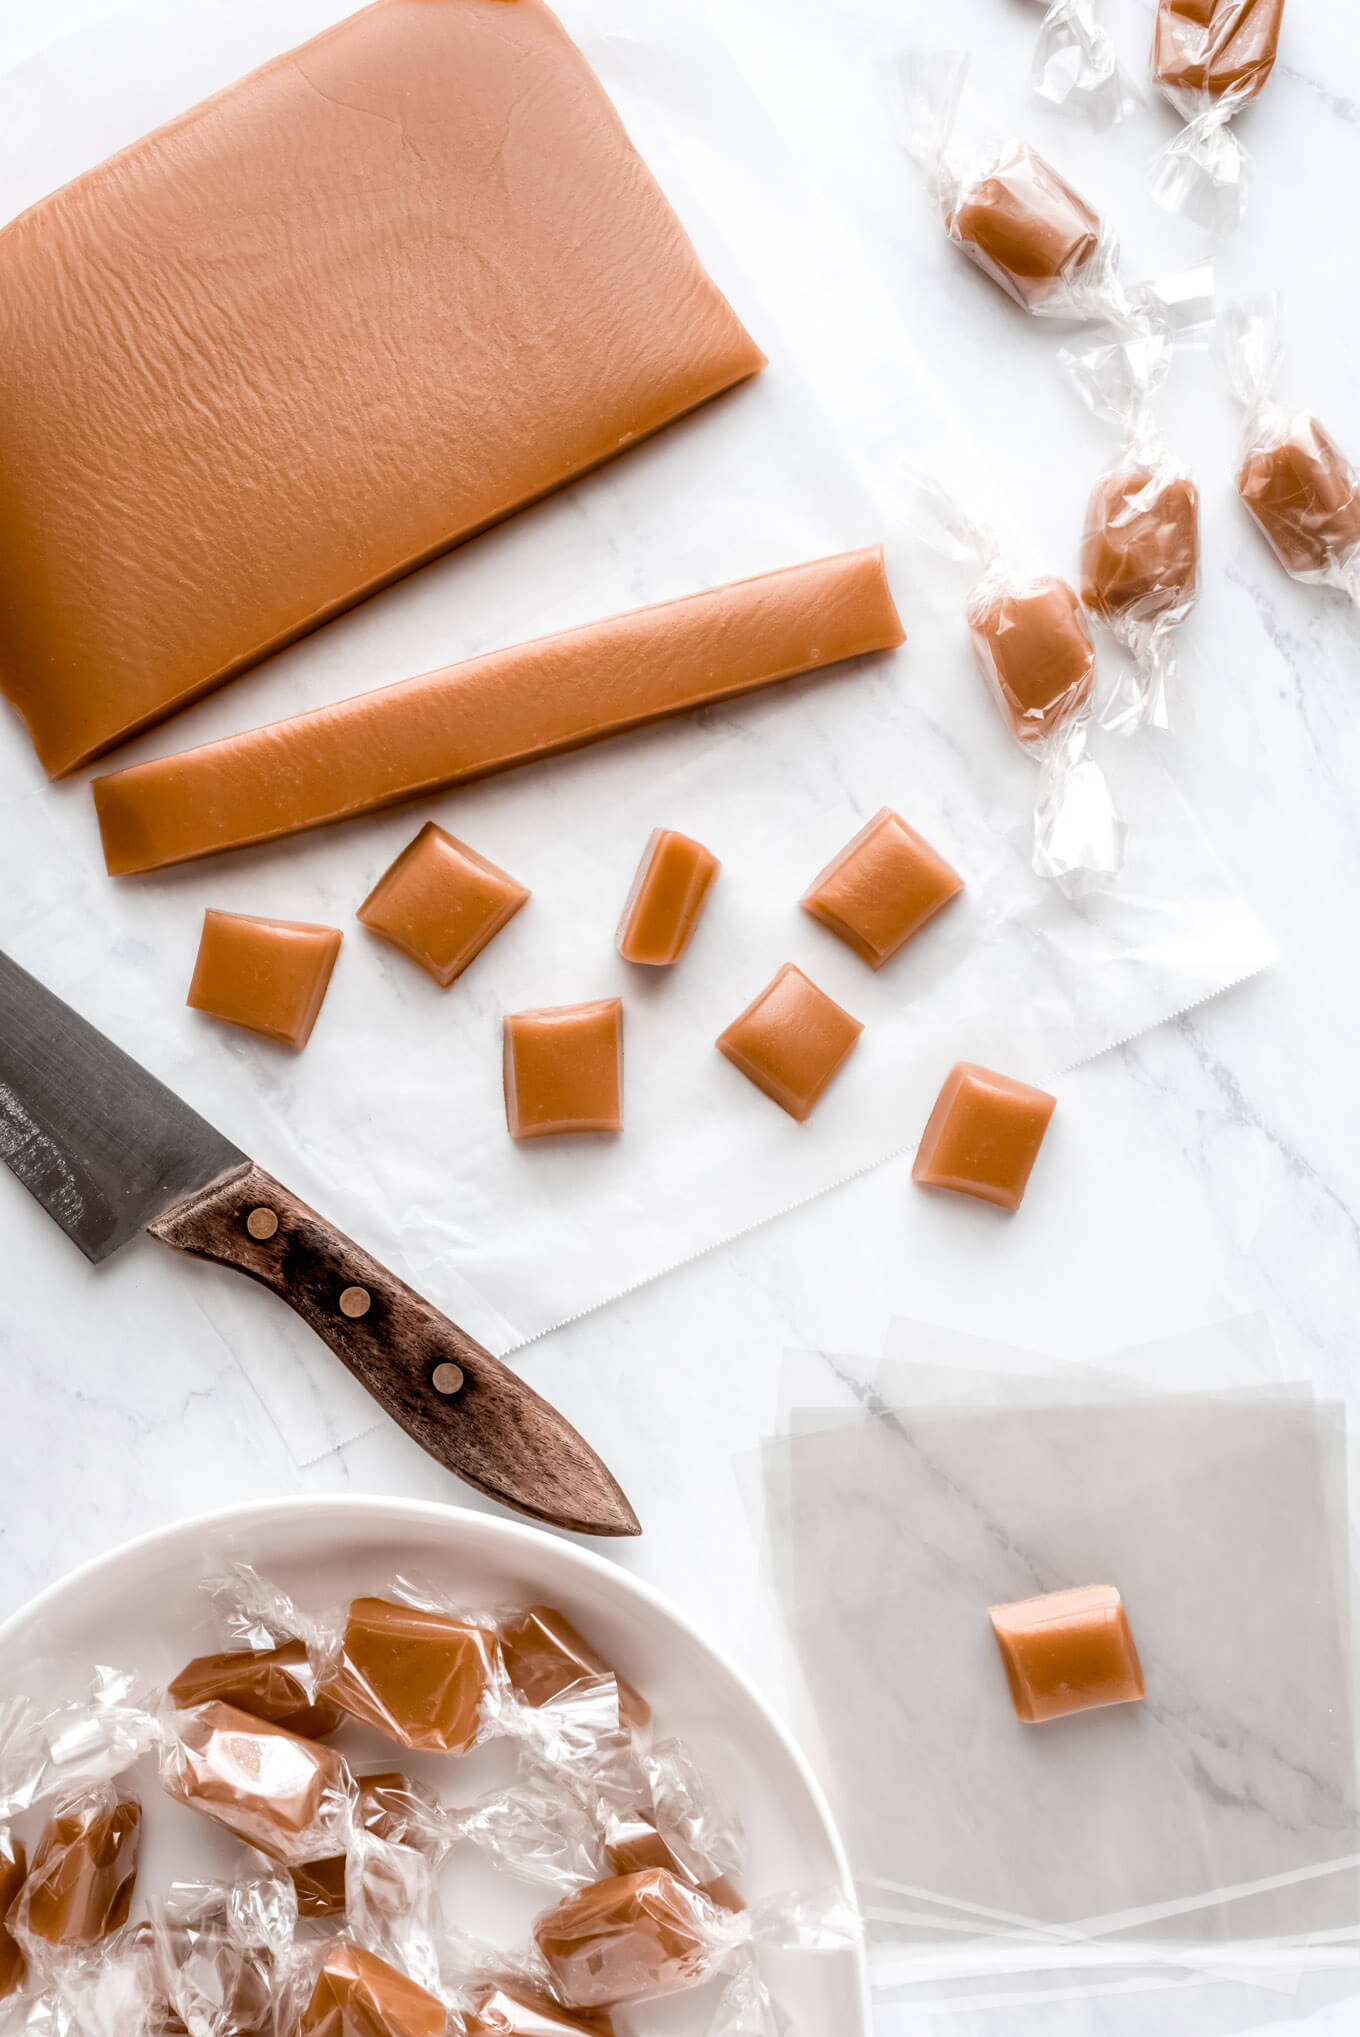 Cutting up and wrapping homemade caramels.